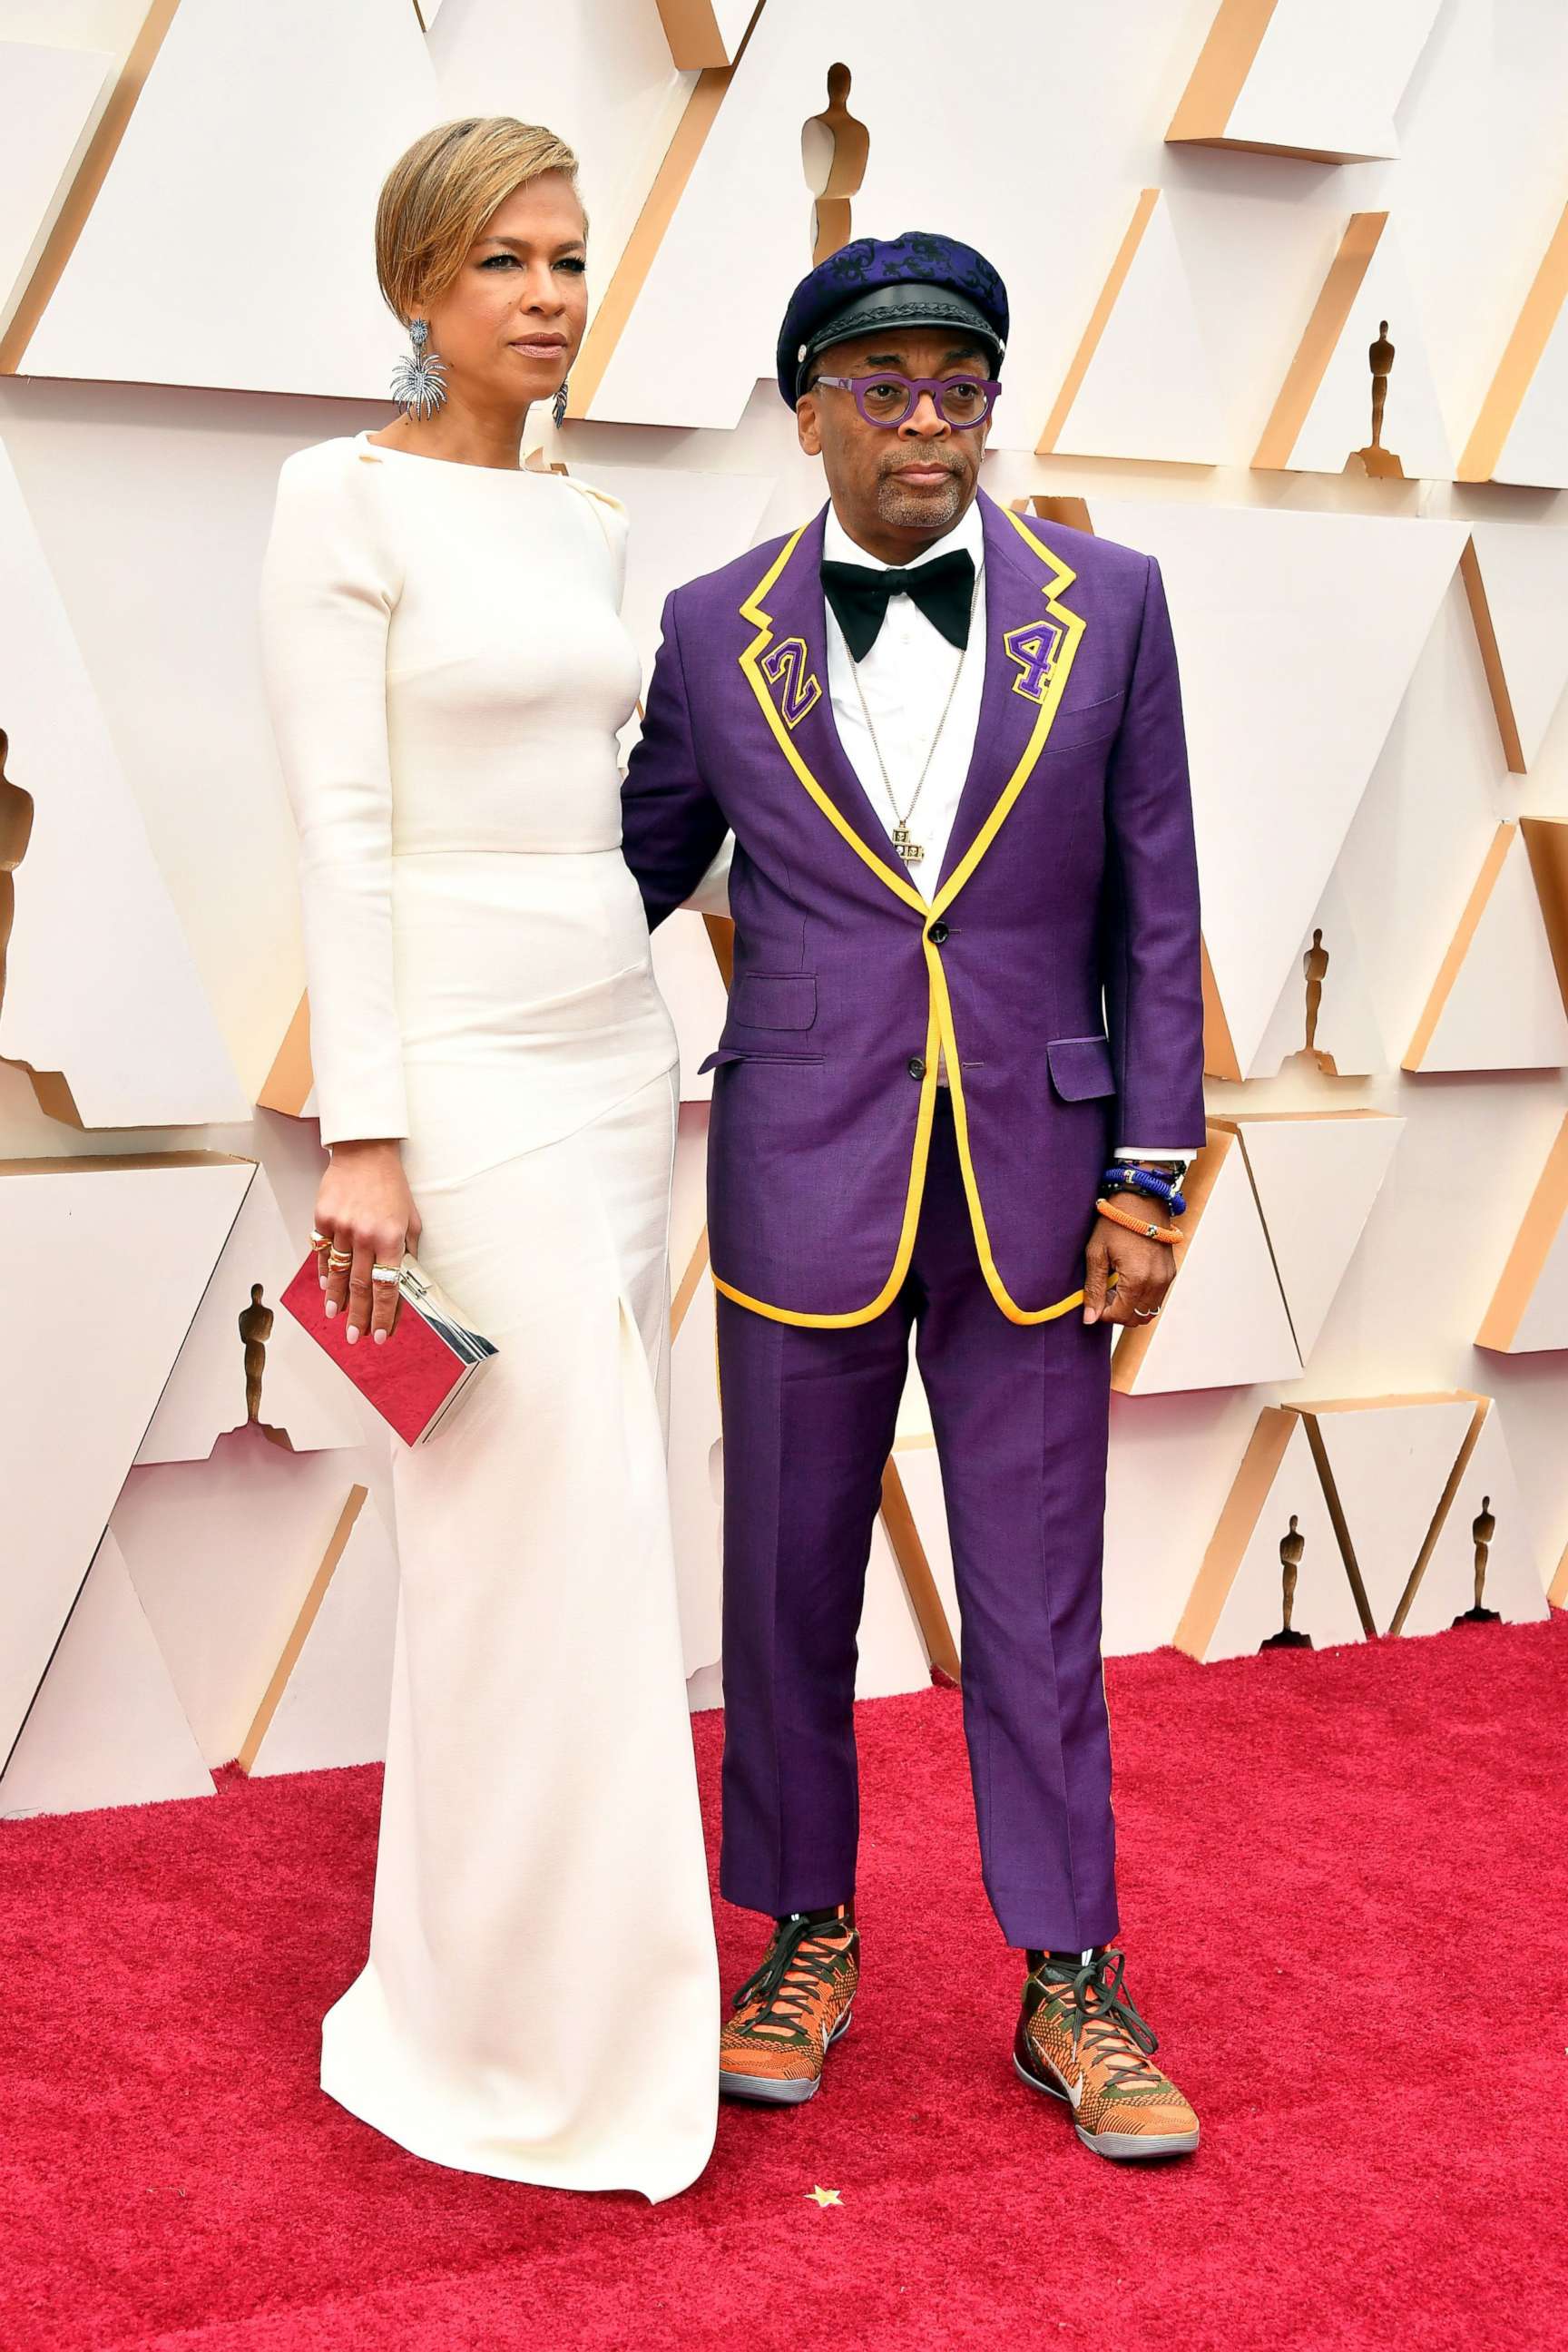 PHOTO: Tonya Lewis Lee and filmmaker Spike Lee attend the 92nd annual Academy Awards, Feb. 9, 2020, in Hollywood, Calif.